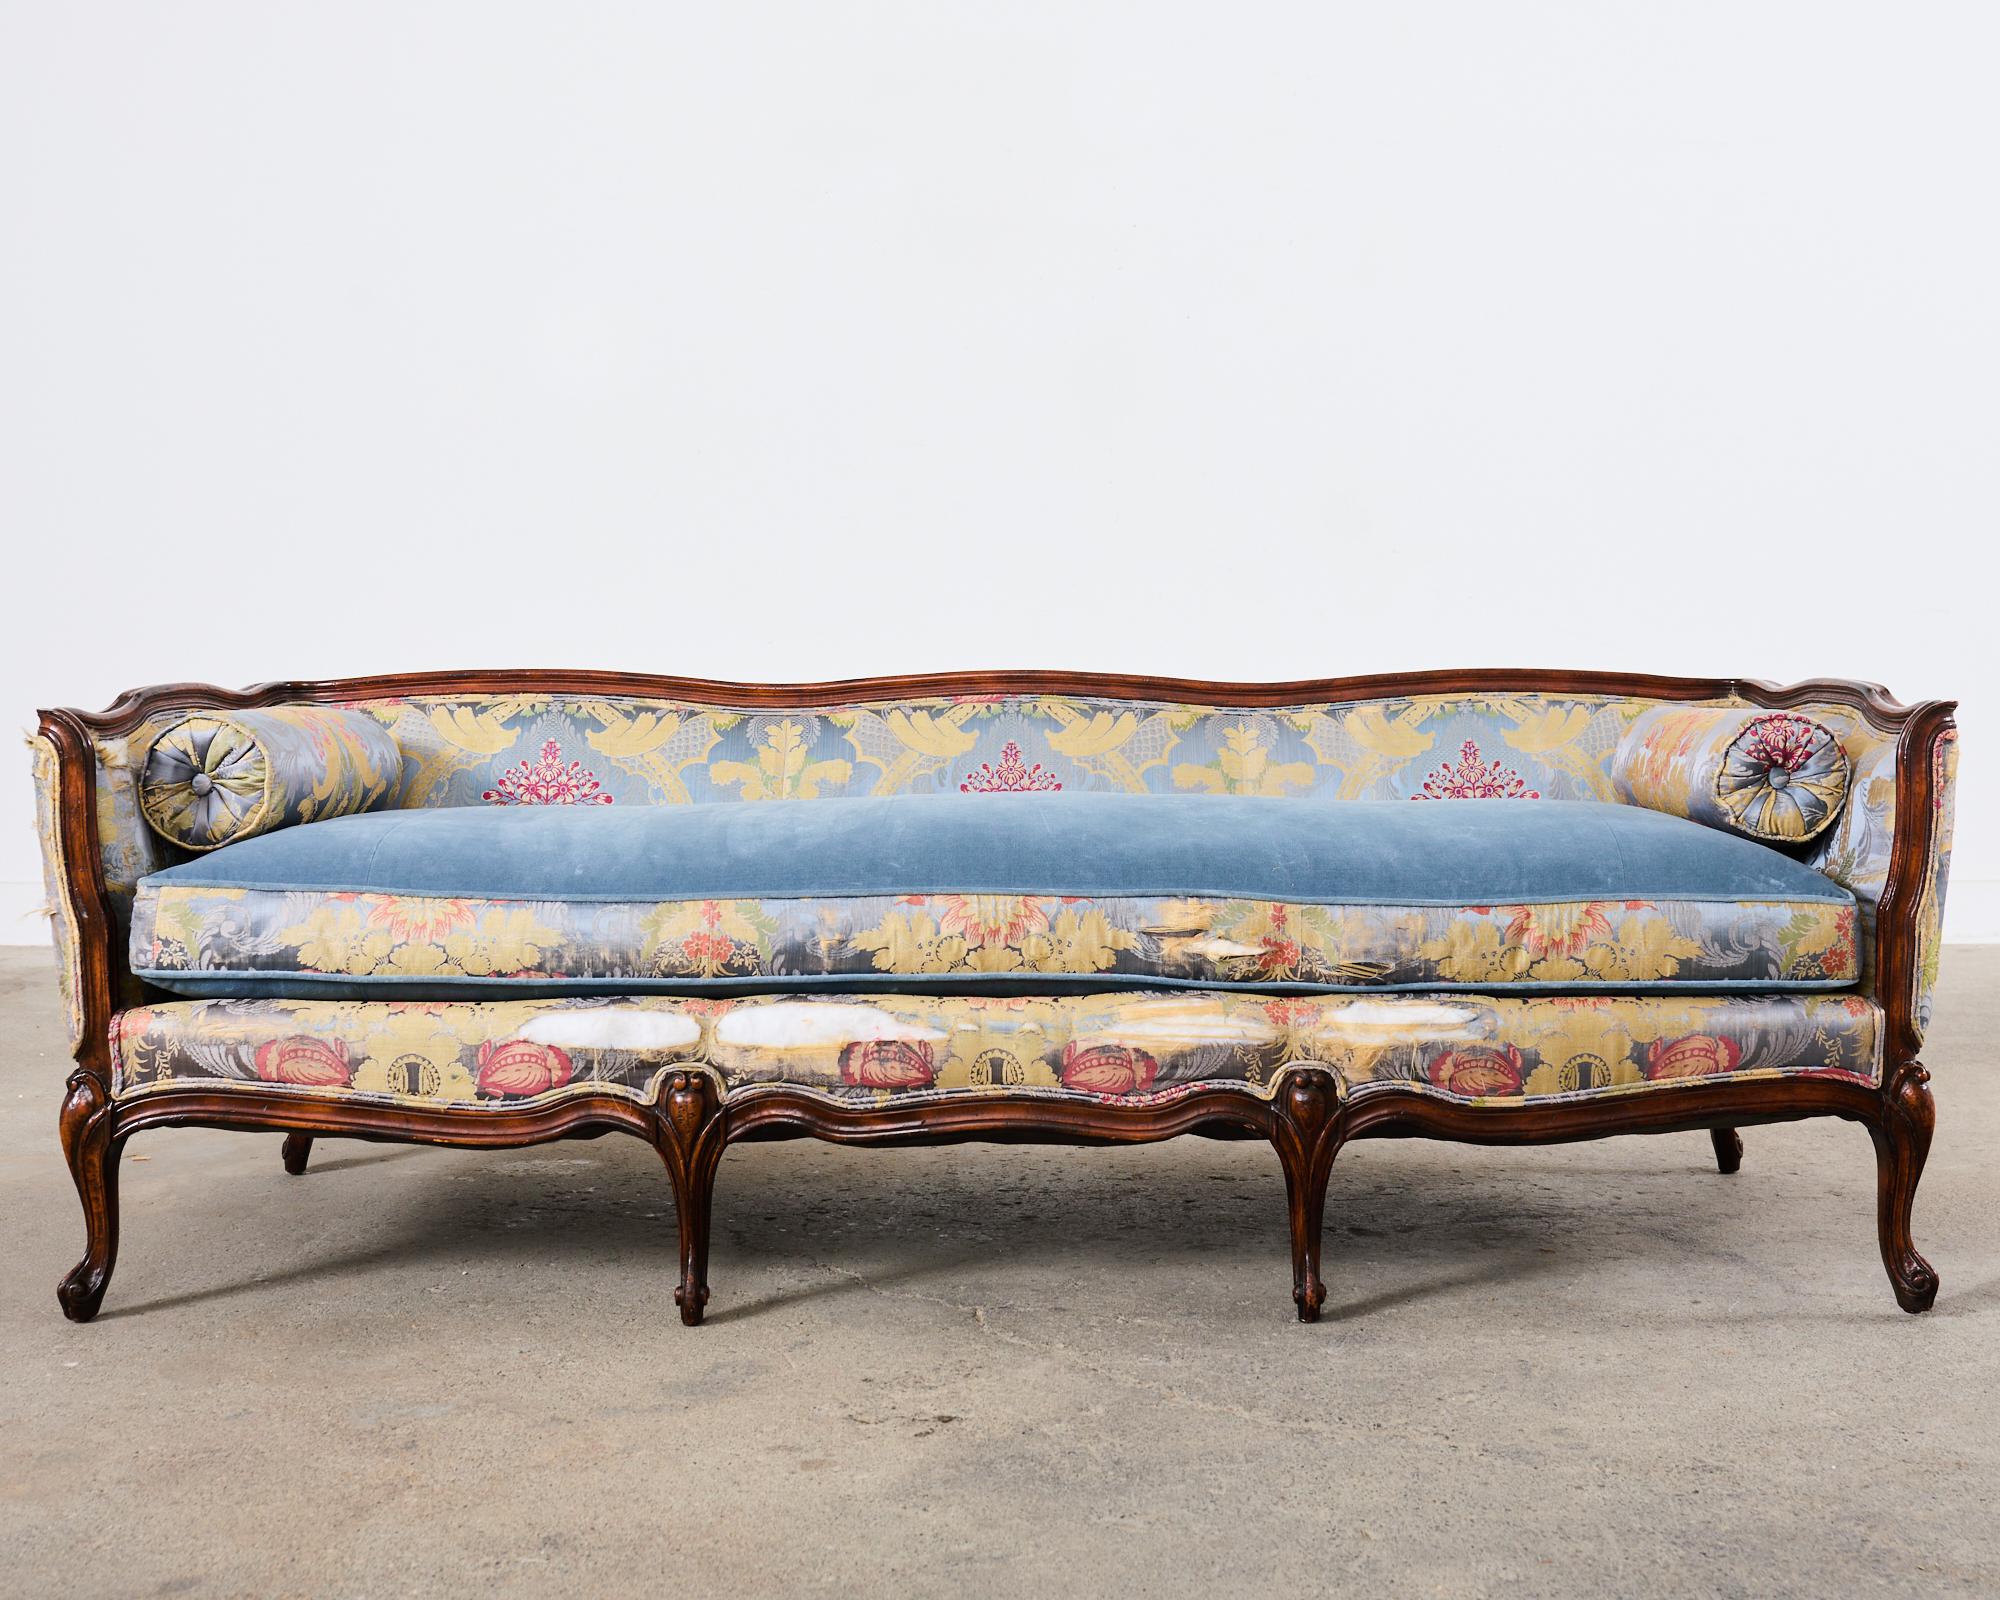 French Provincial Louis XV Style Serpentine Canape Sofa Settee In Distressed Condition For Sale In Rio Vista, CA